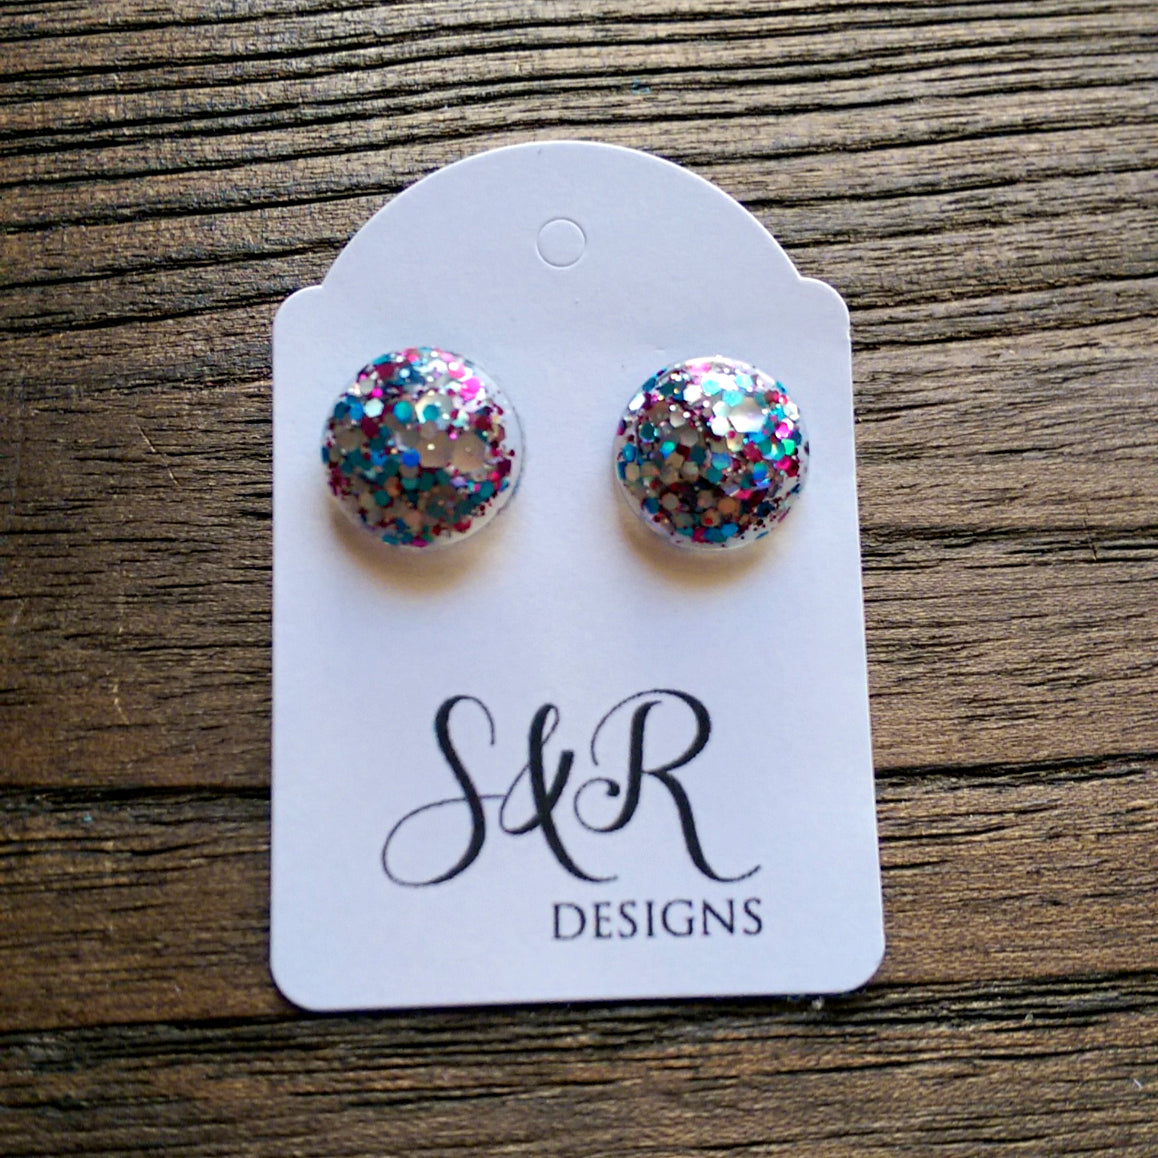 Circle Resin Stud Earrings, Blue, Silver , Pink Glitter Earrings - Silver and Resin Designs